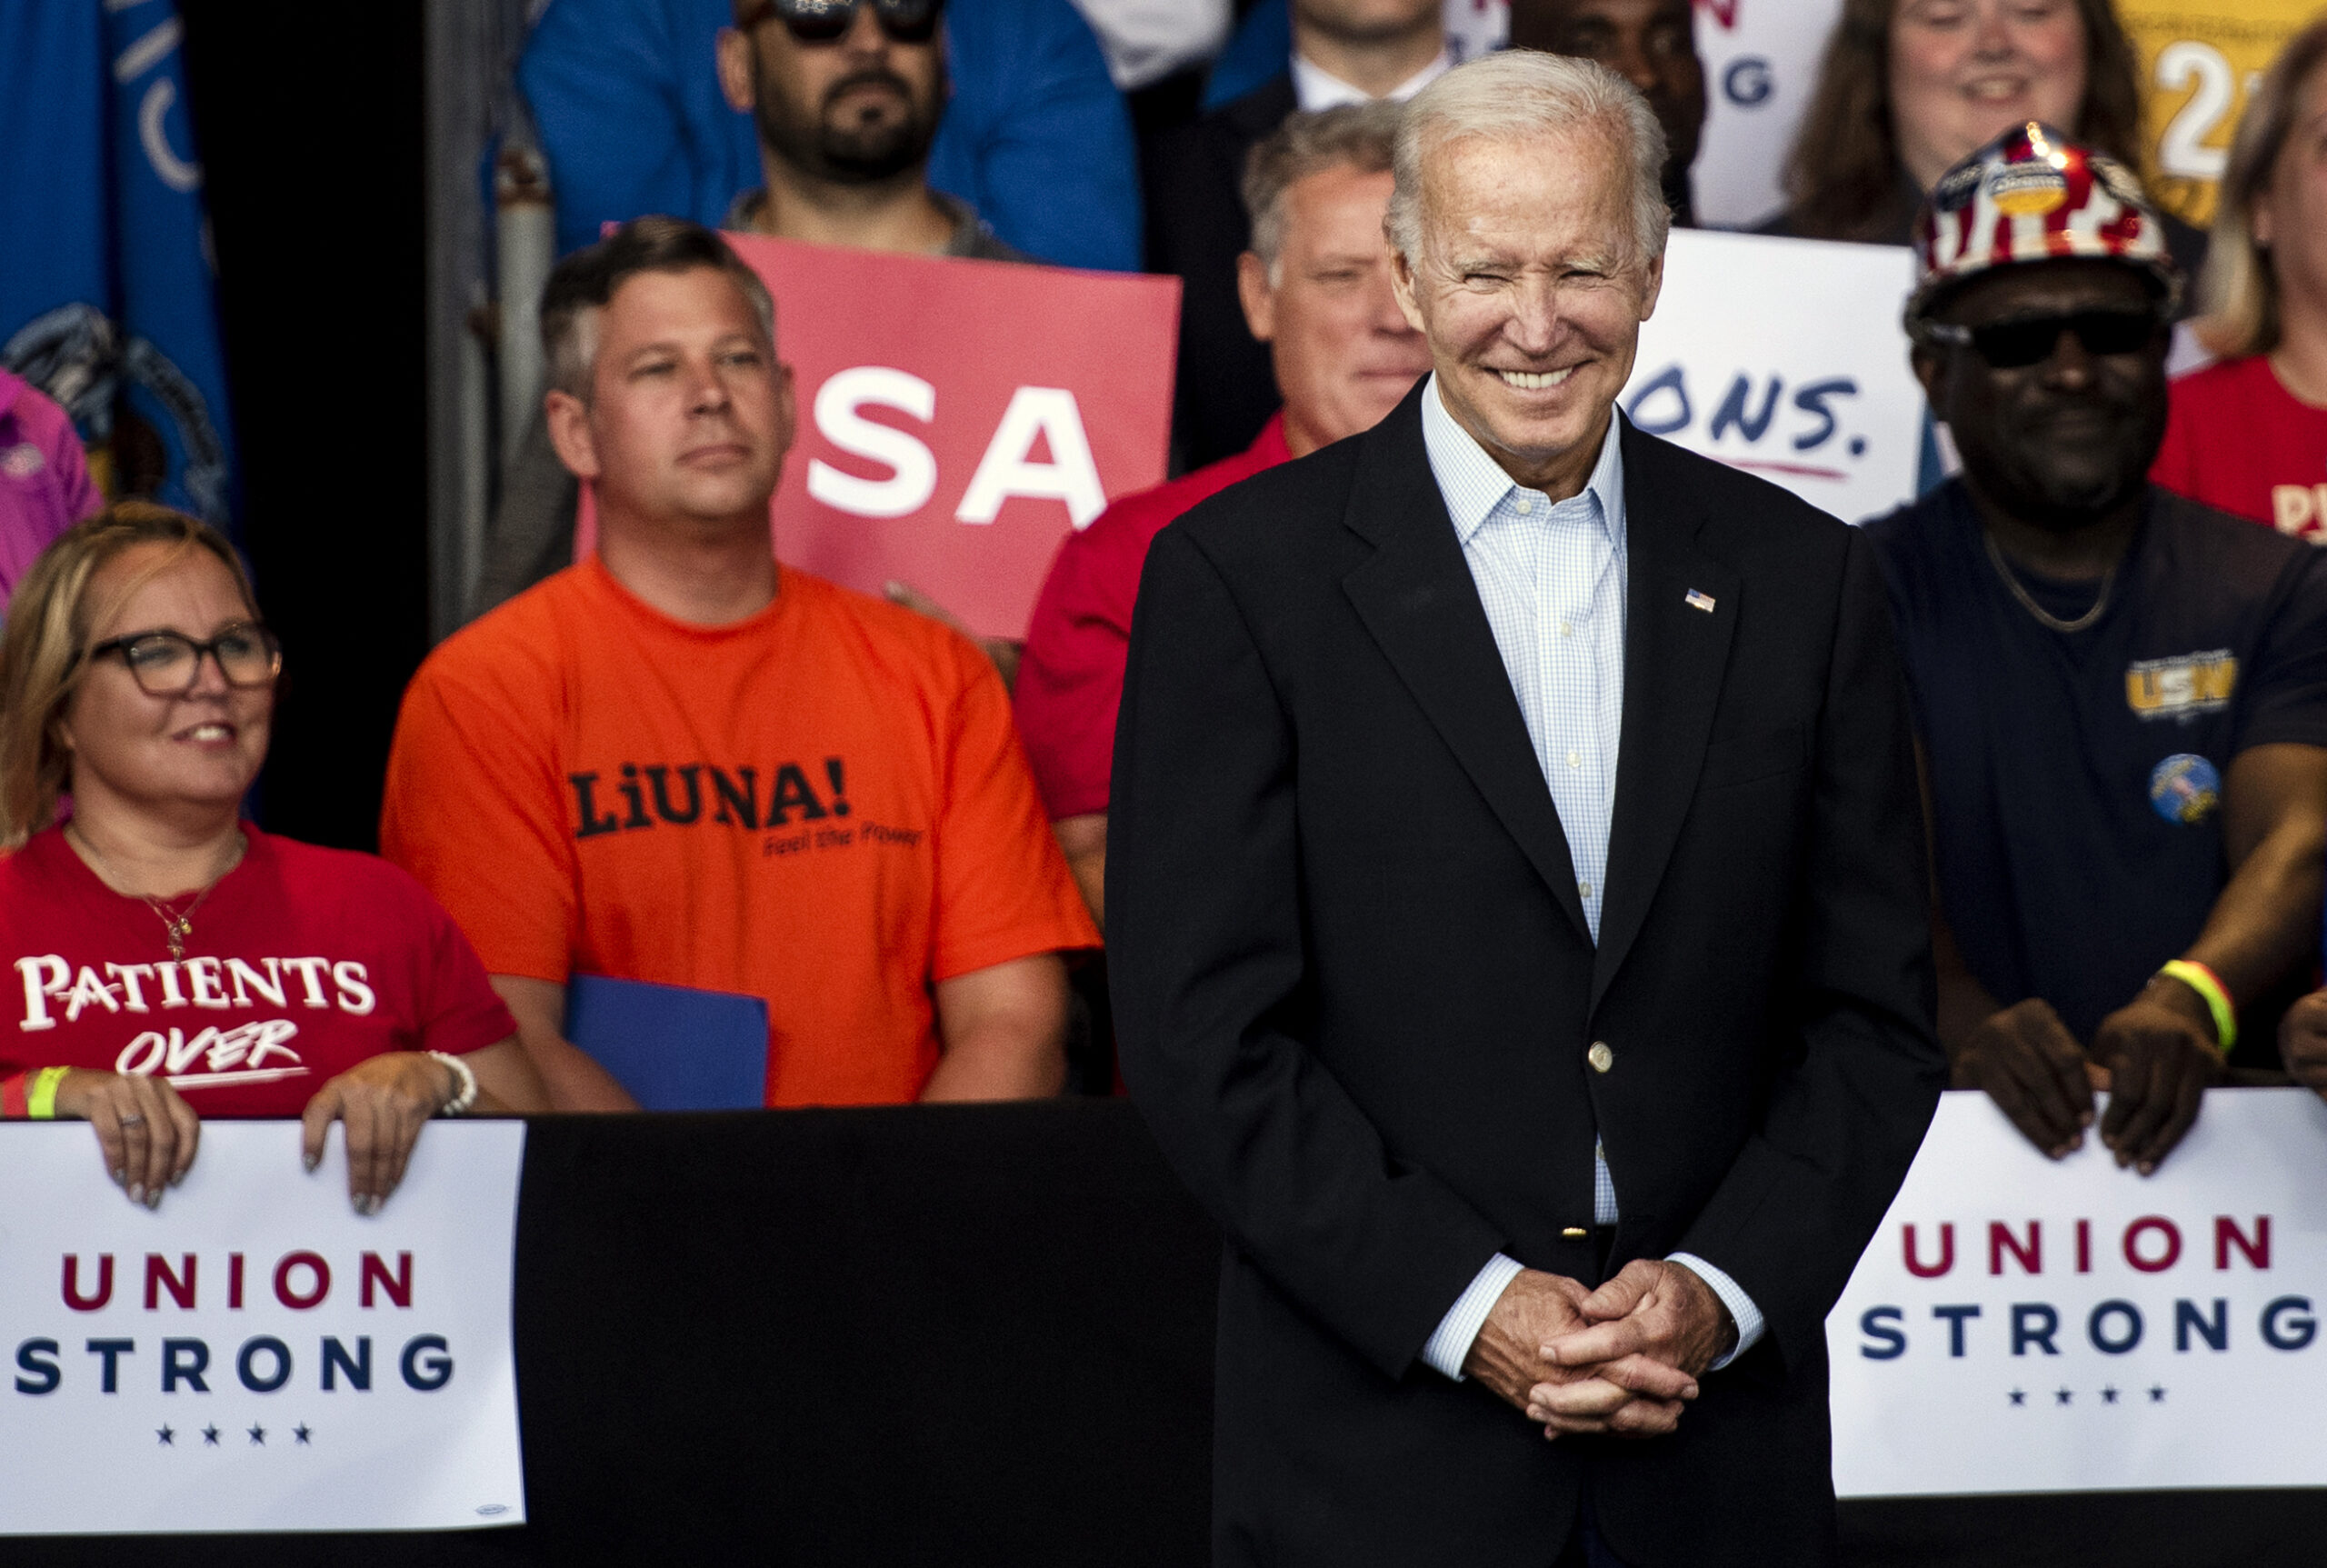 Pres. Biden smiles as he stands with his hands clasped. Supporters behind him hold signs that say, 